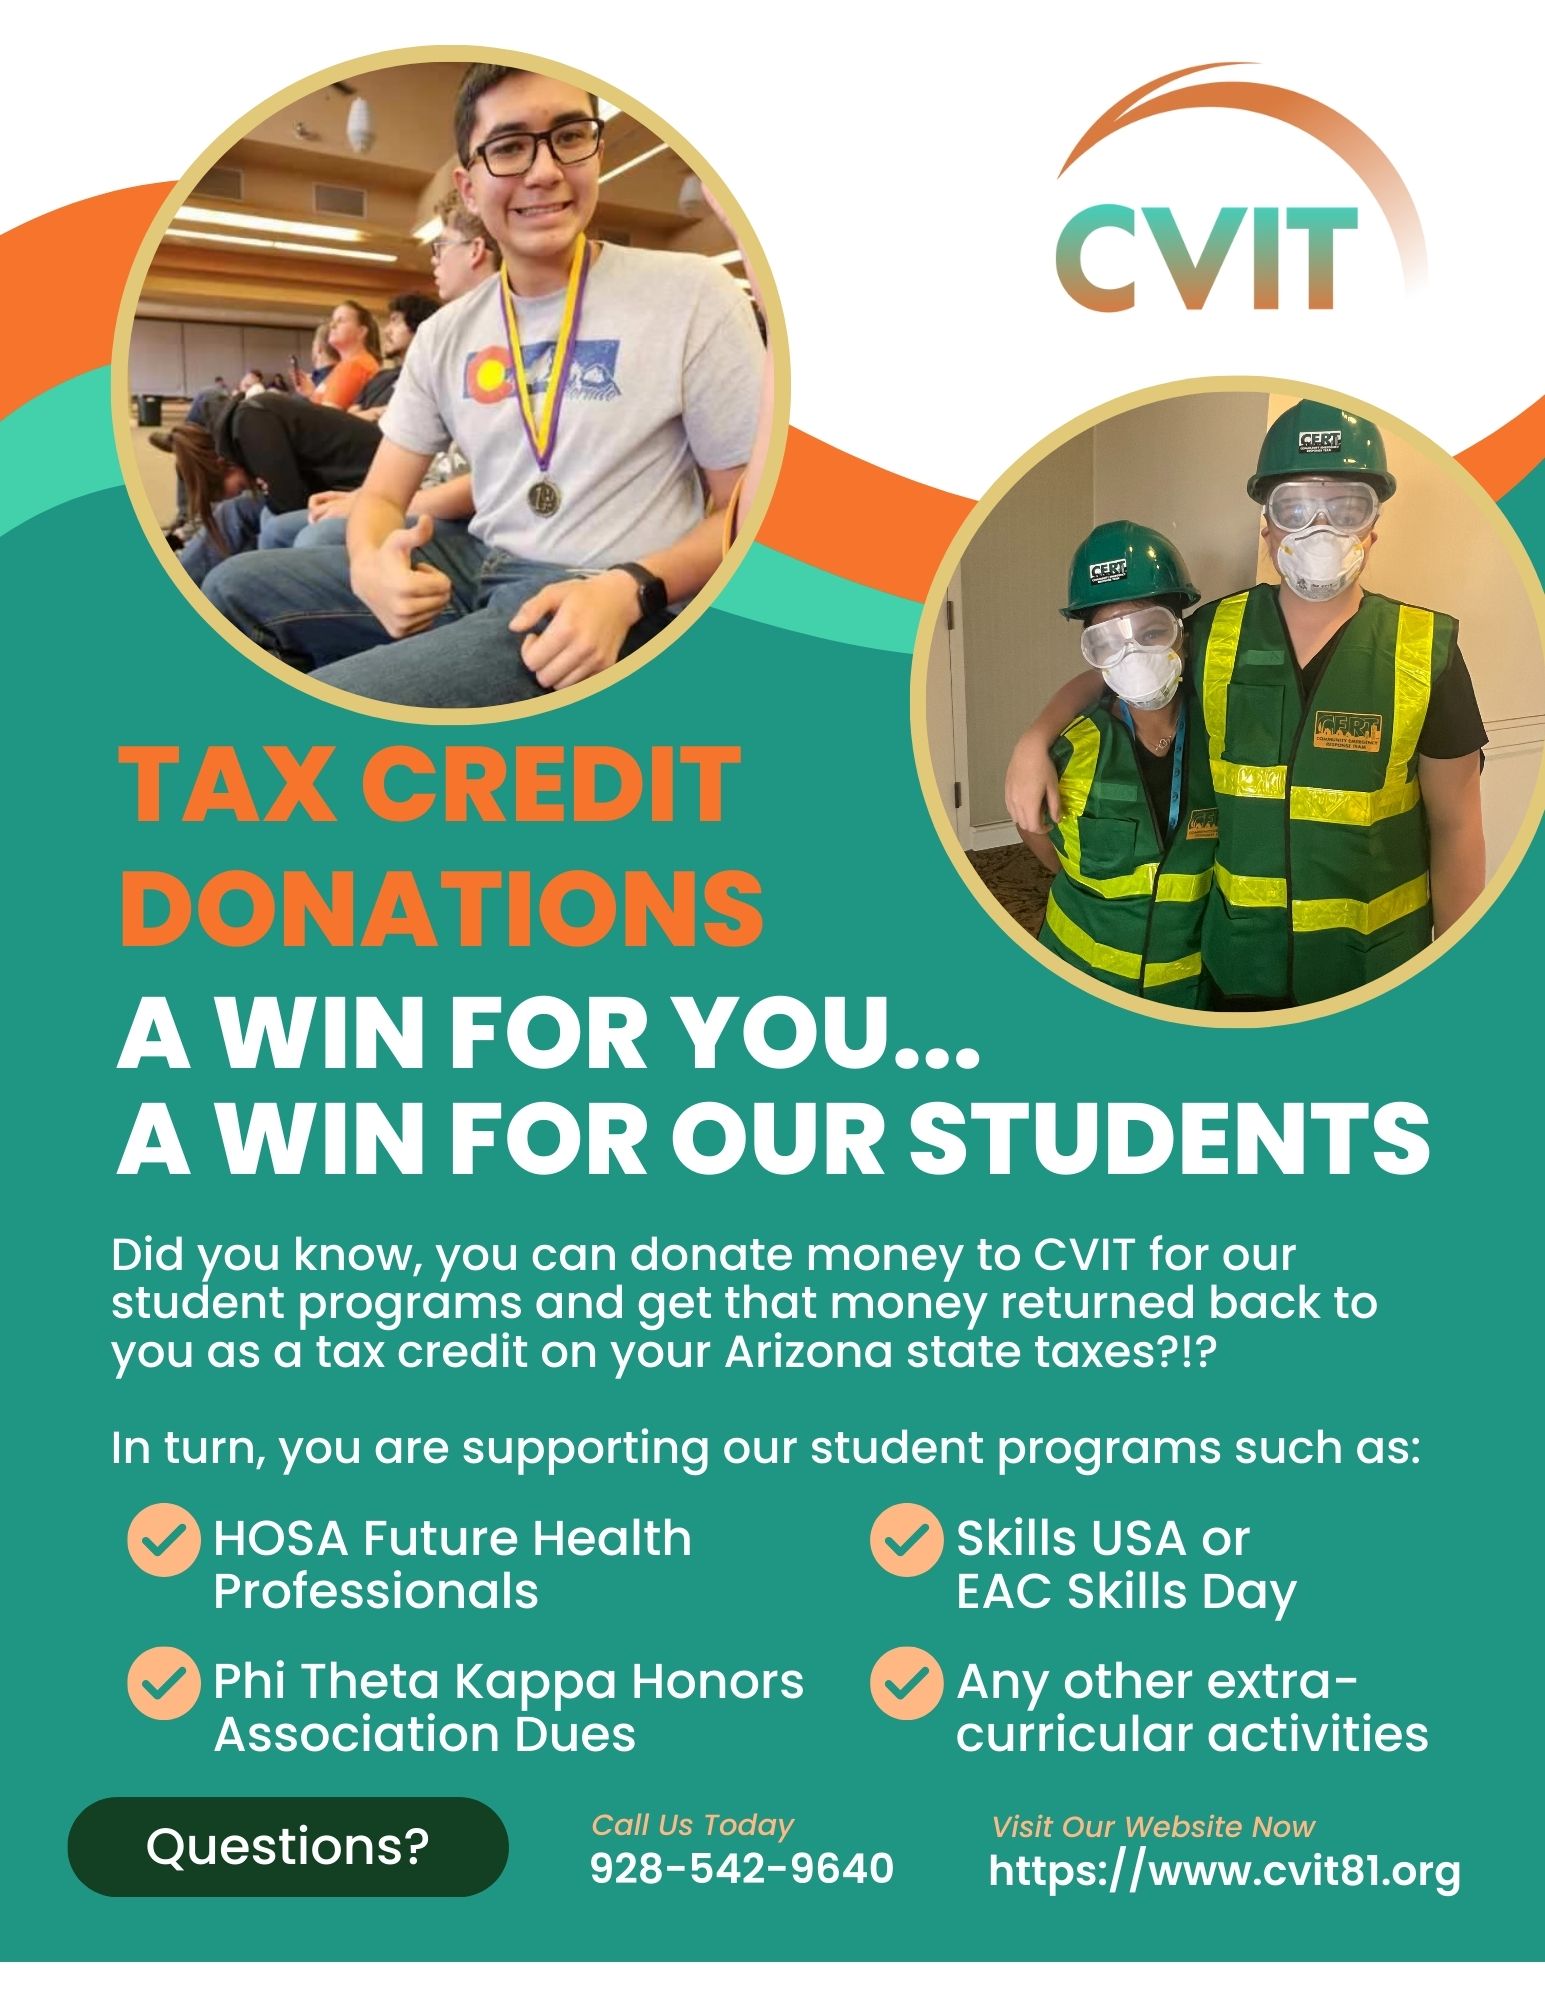 Tax Credit Donations can help support CVIT student programs